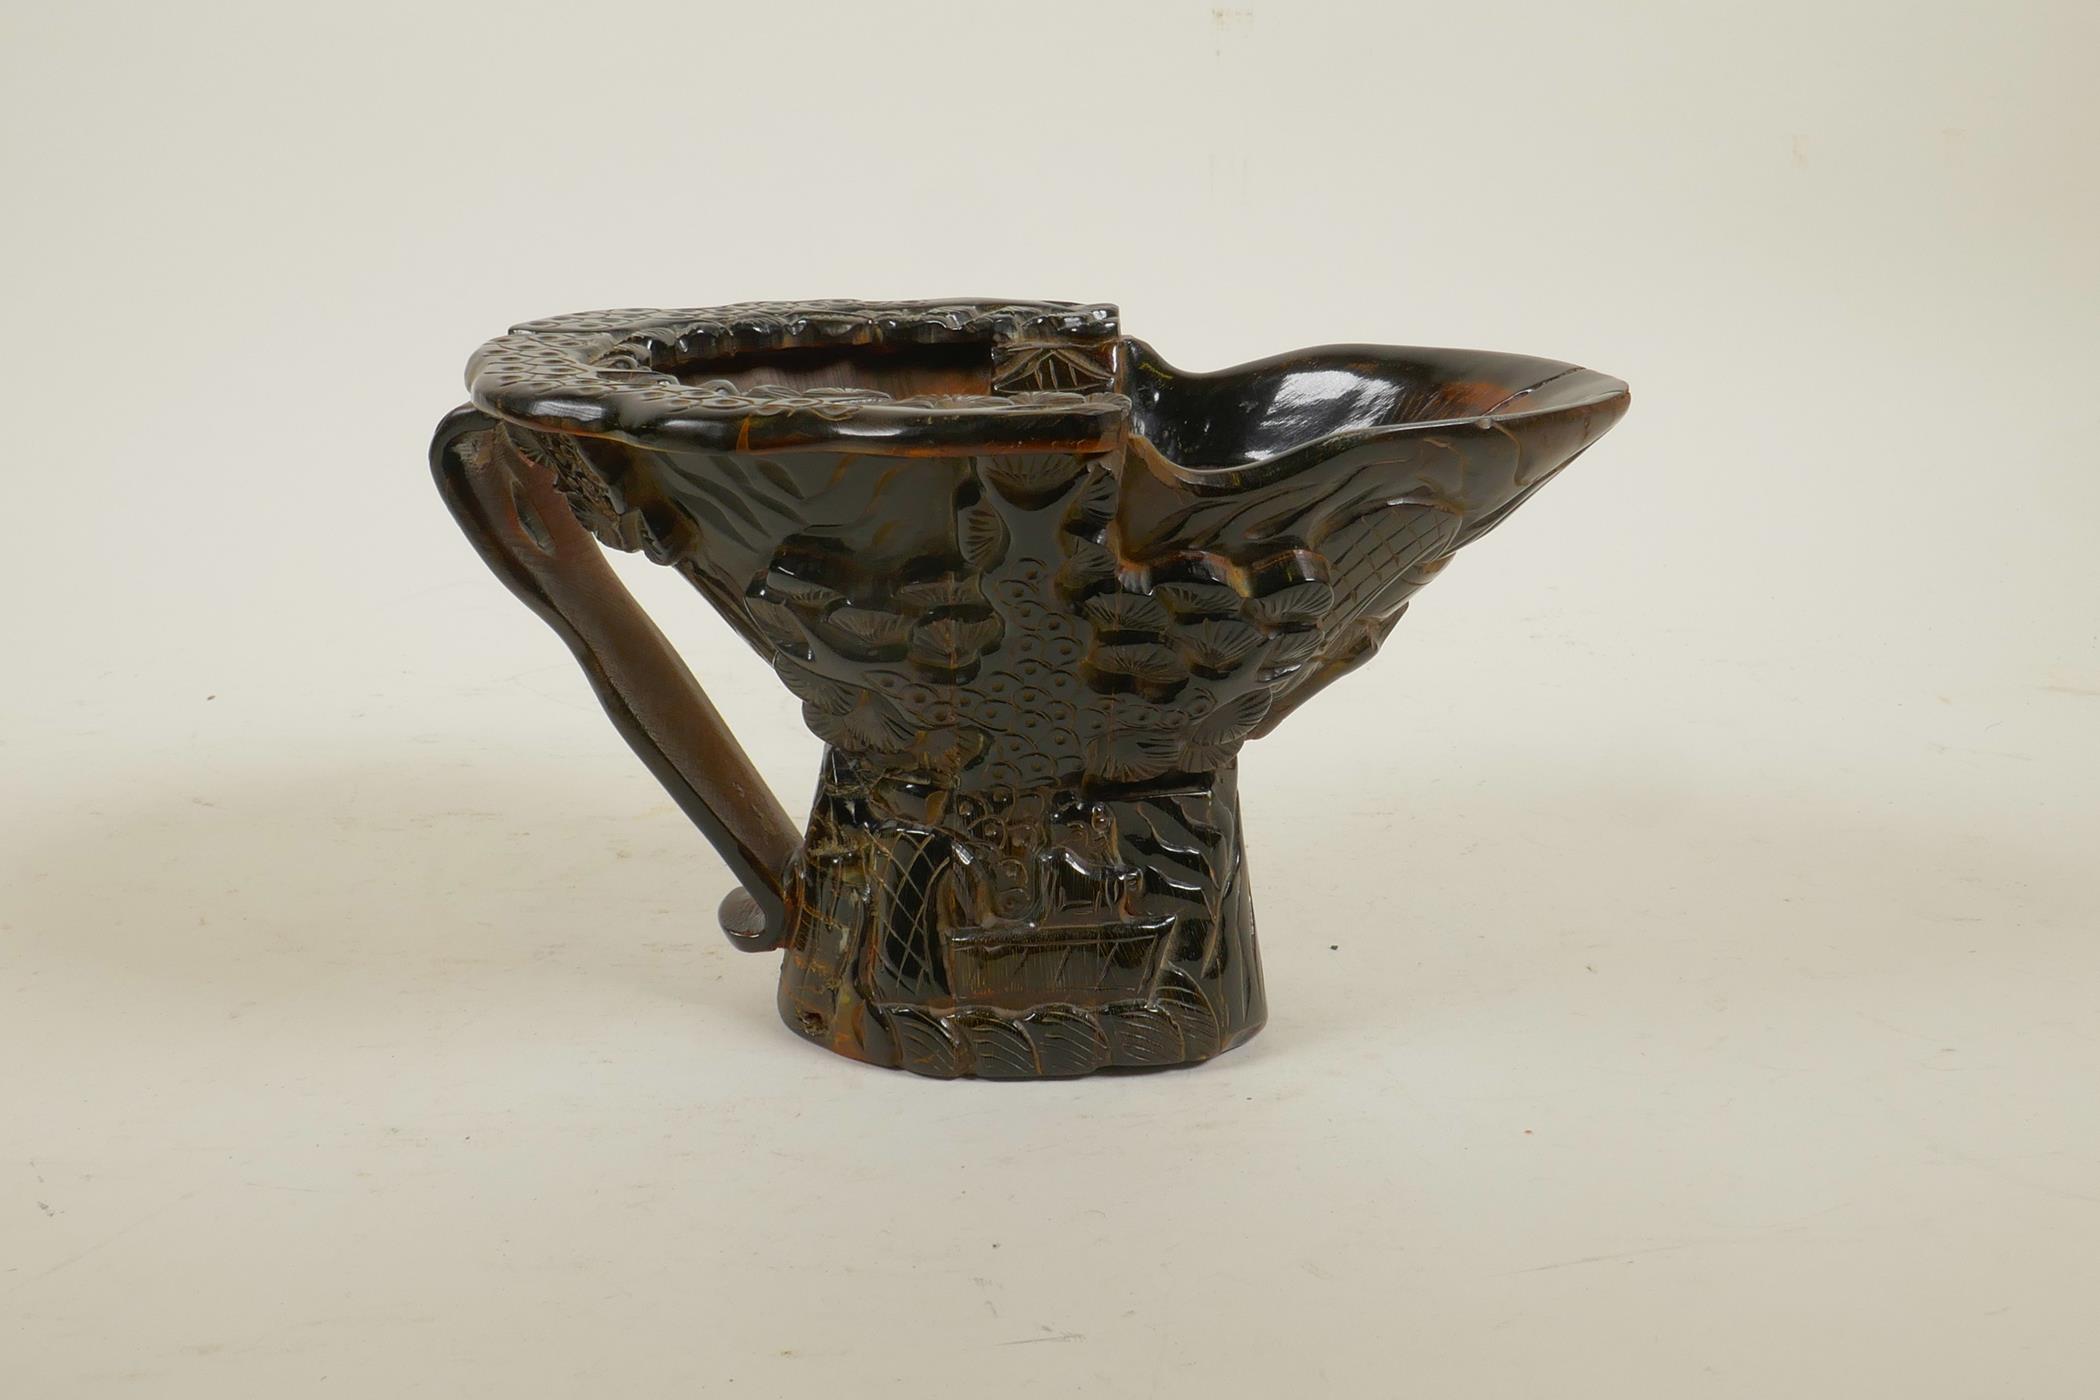 A Chinese sectional horn libation cup with carved decoration of figures in a forest, 4½" high x